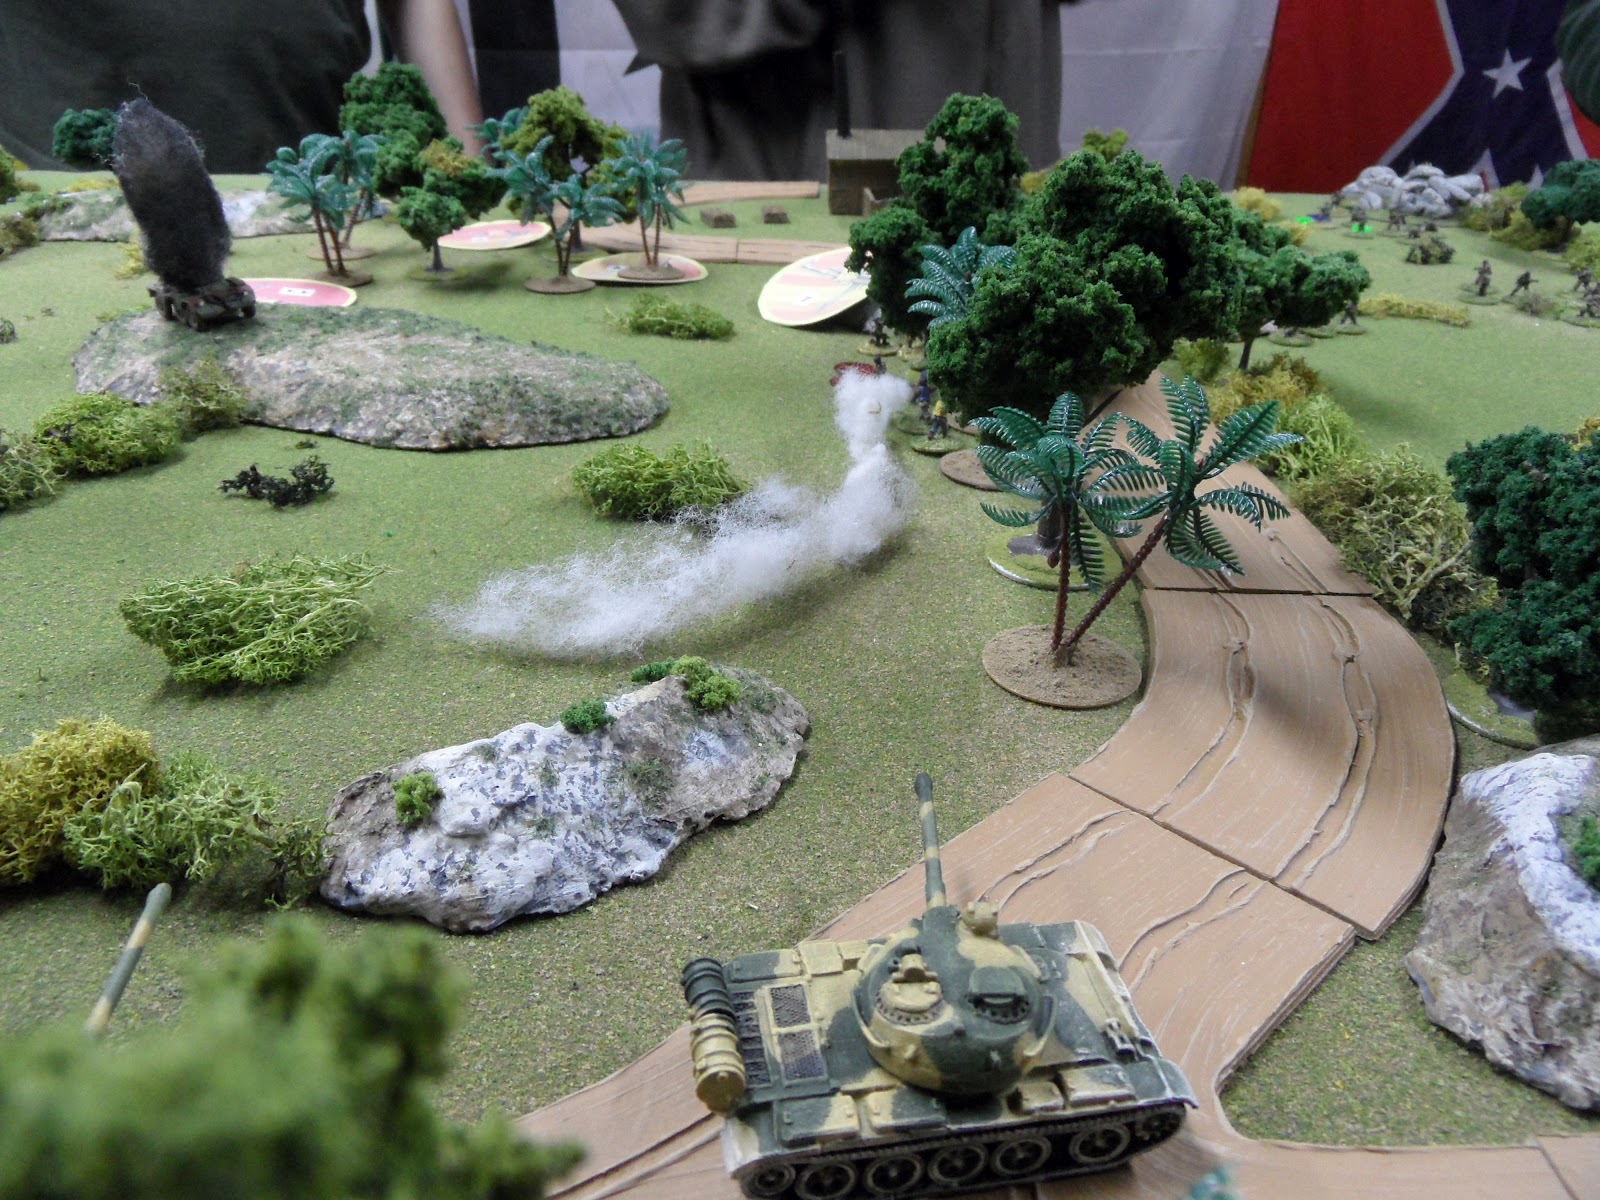  The IMC troops hiding in the trees return fire with an RPG:&nbsp;&nbsp;it went wildly astray. 